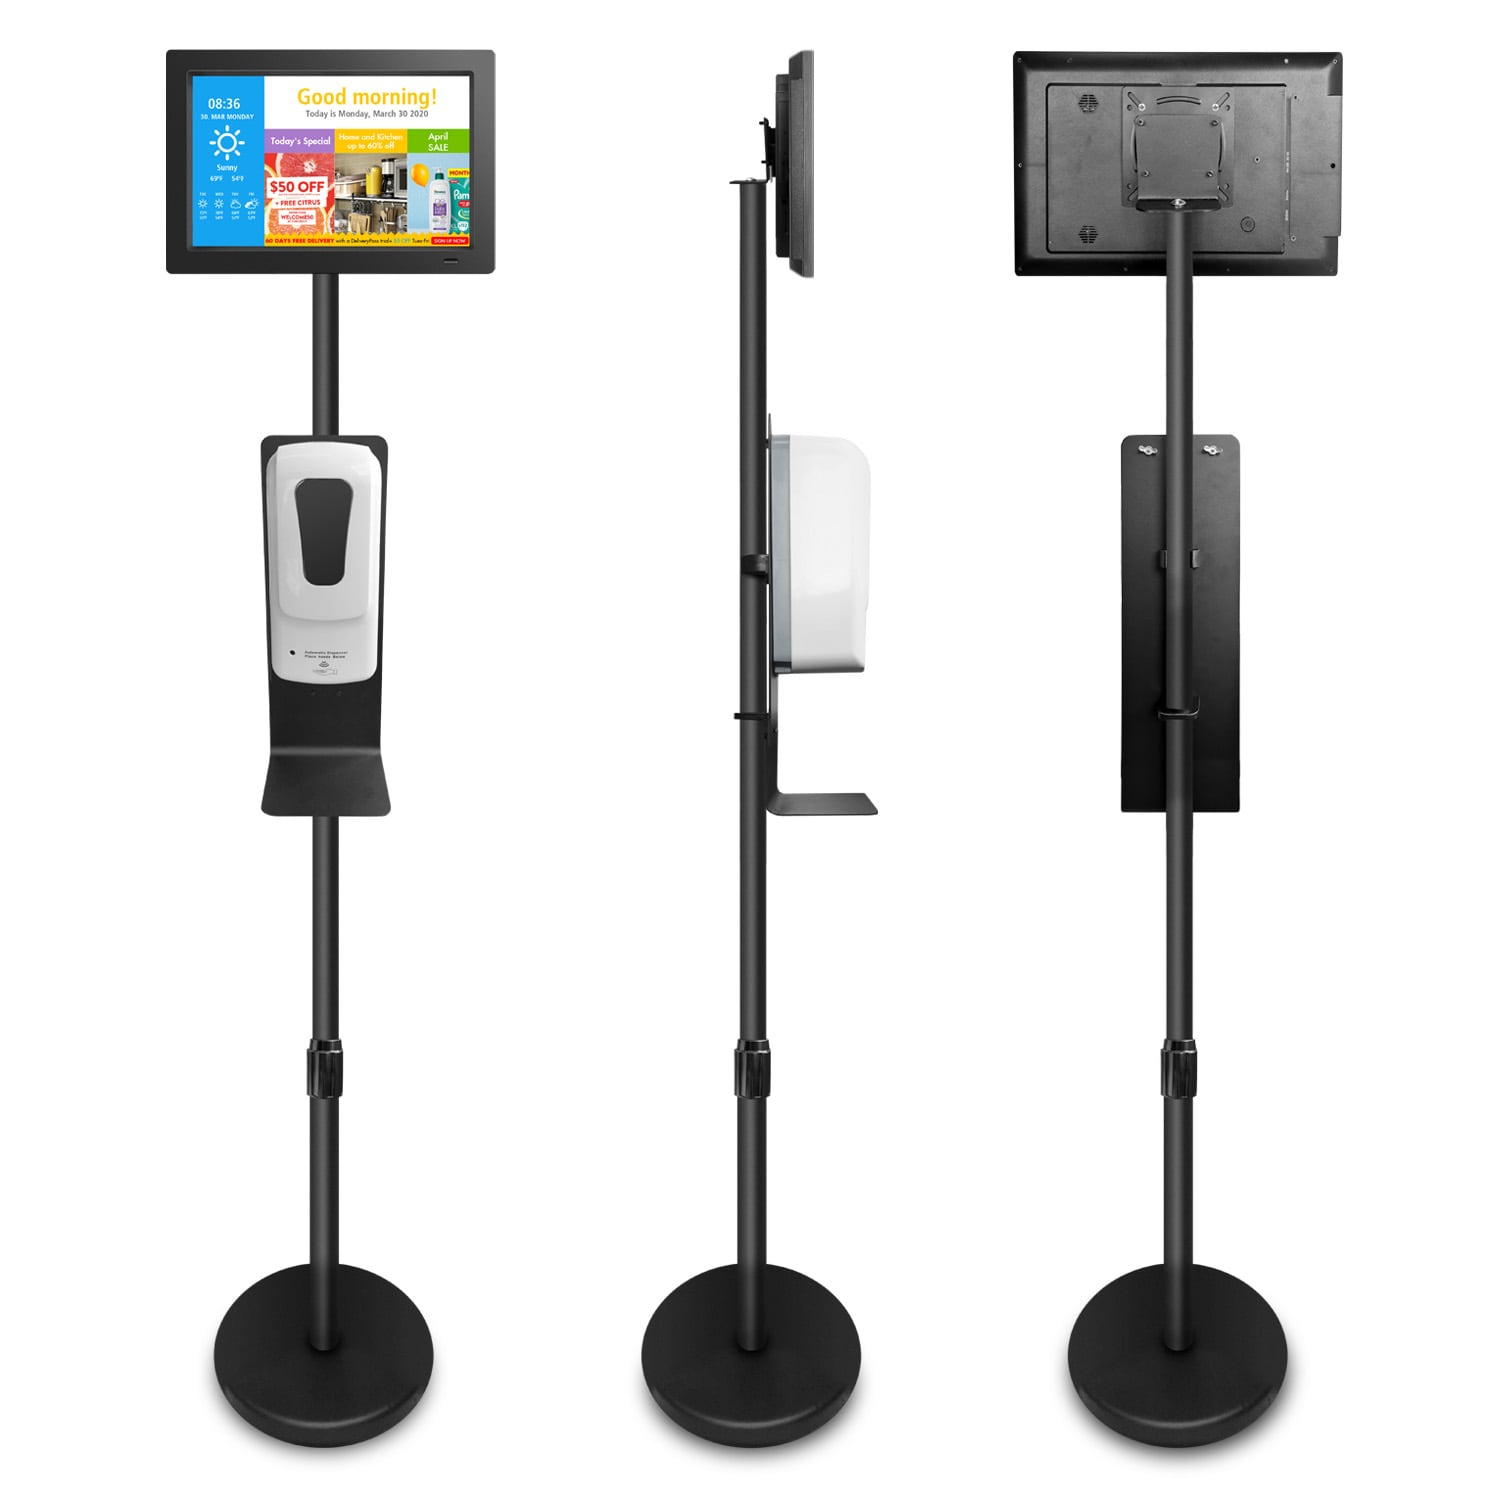 Sungale 14 inch Digital Signage Screen with Sanitation Station Stand | JPG/MP4 Compatible | Built-In Speakers | Wi-Fi | Black | Easy Assembly | -  CPF1503-STAND-SET